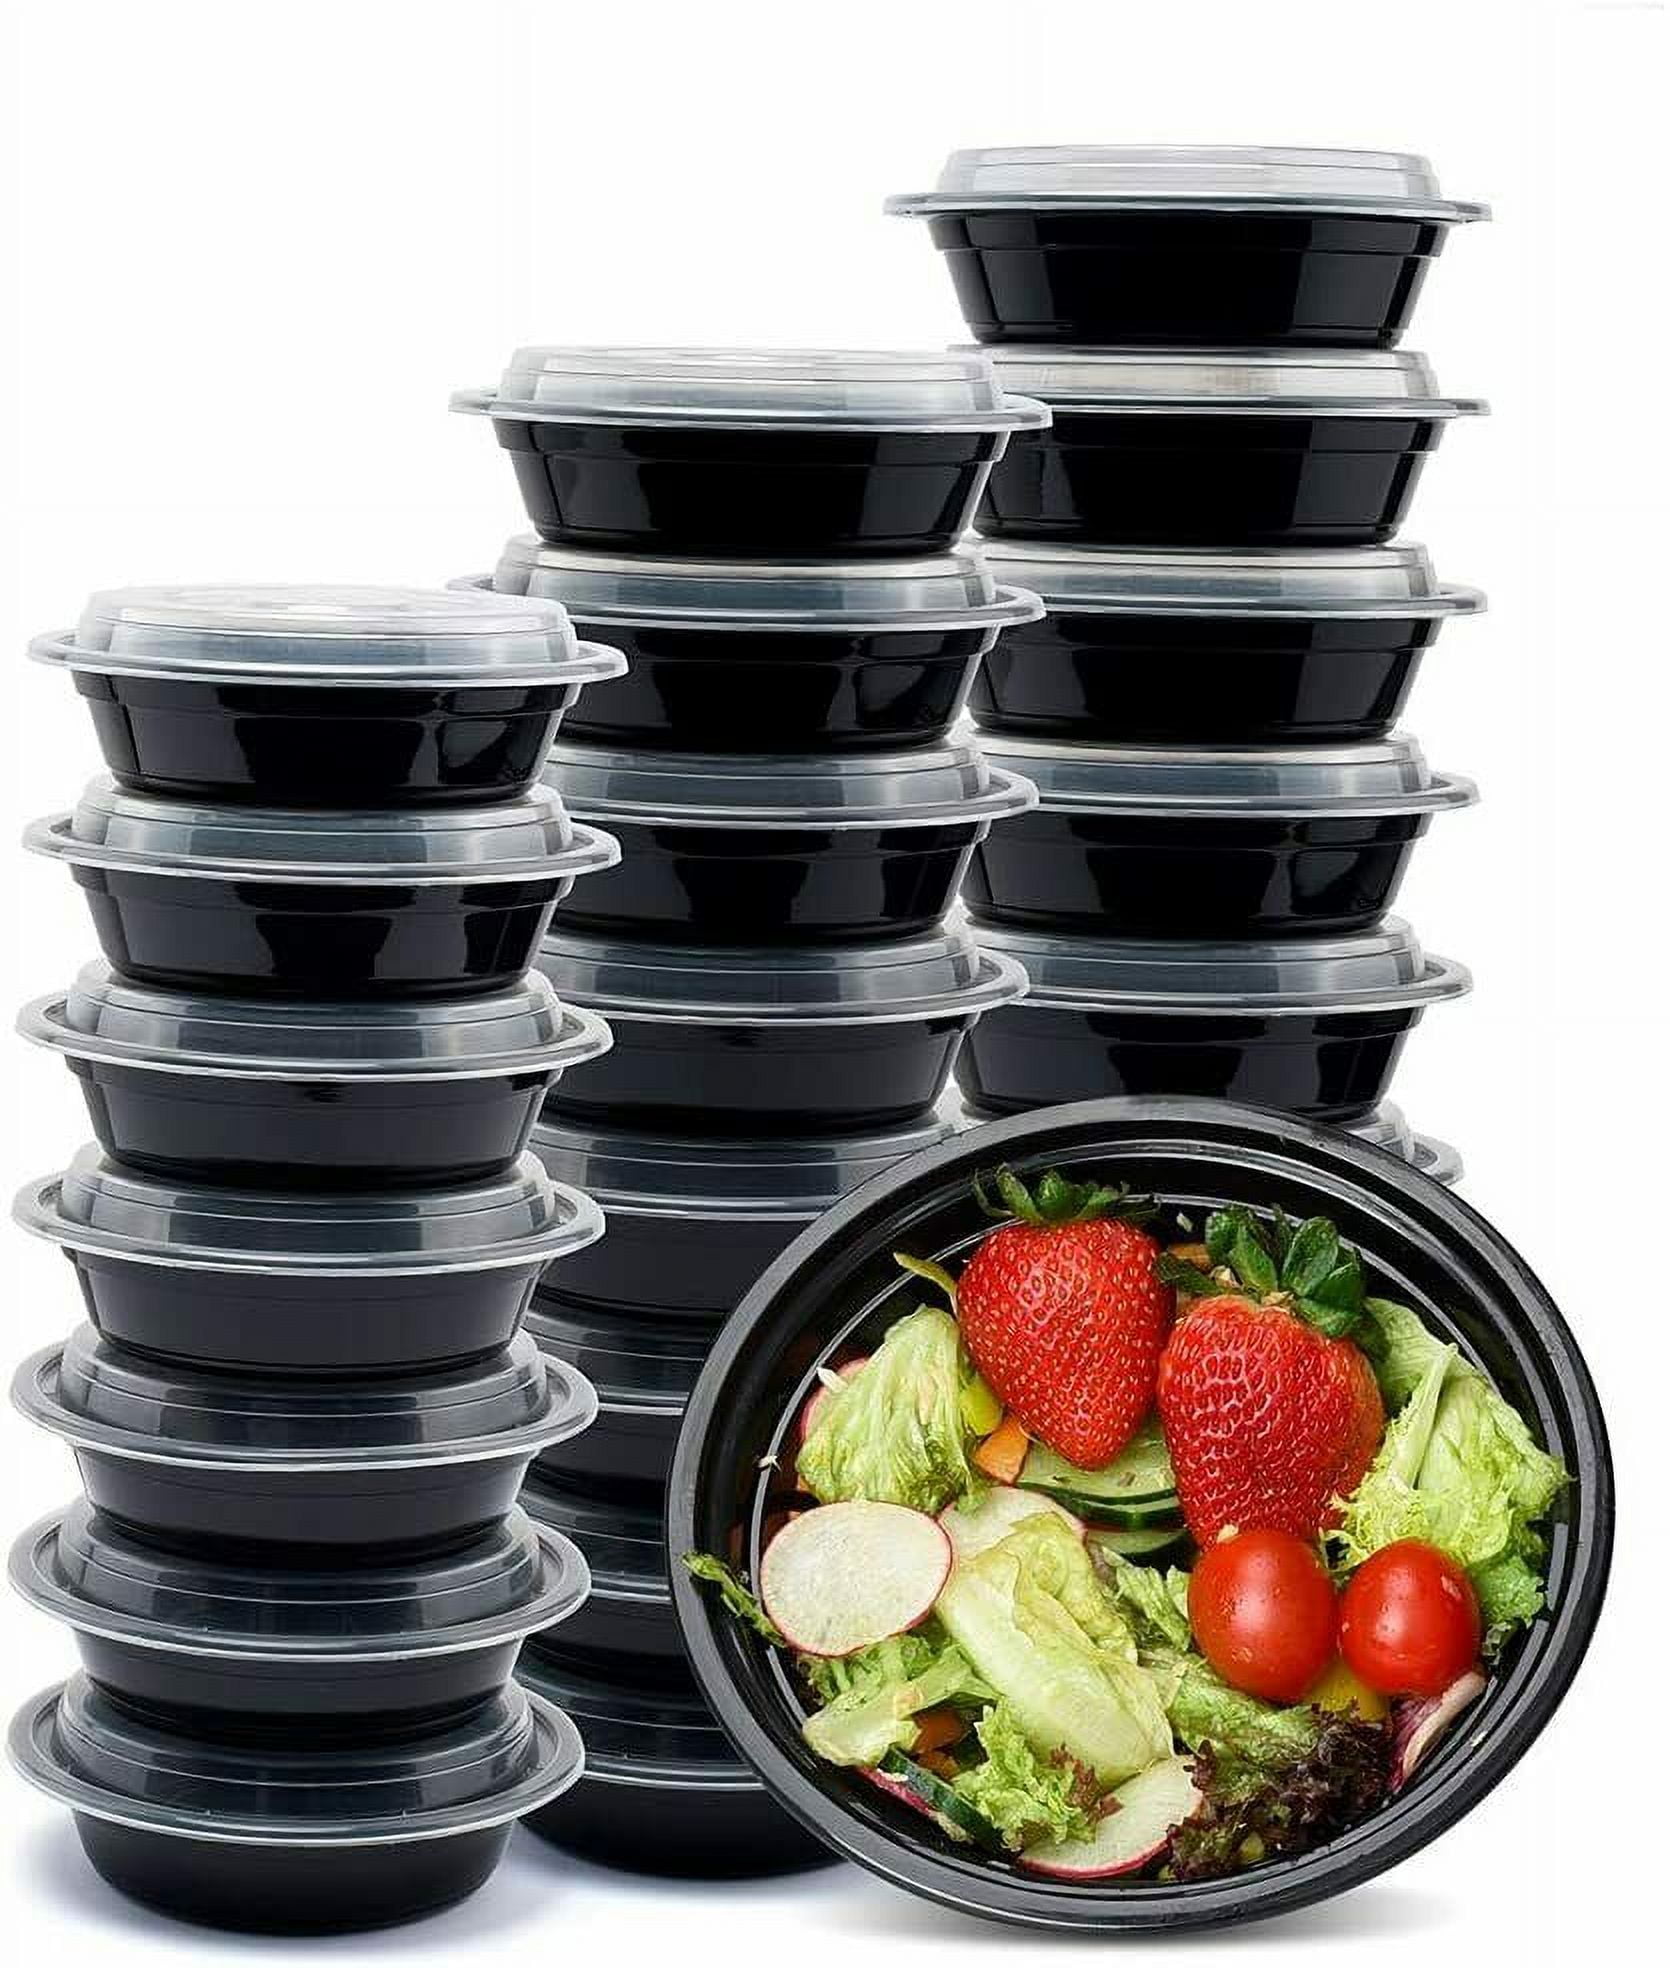  DuraHome Food Storage Containers with Lids 8oz, 16oz